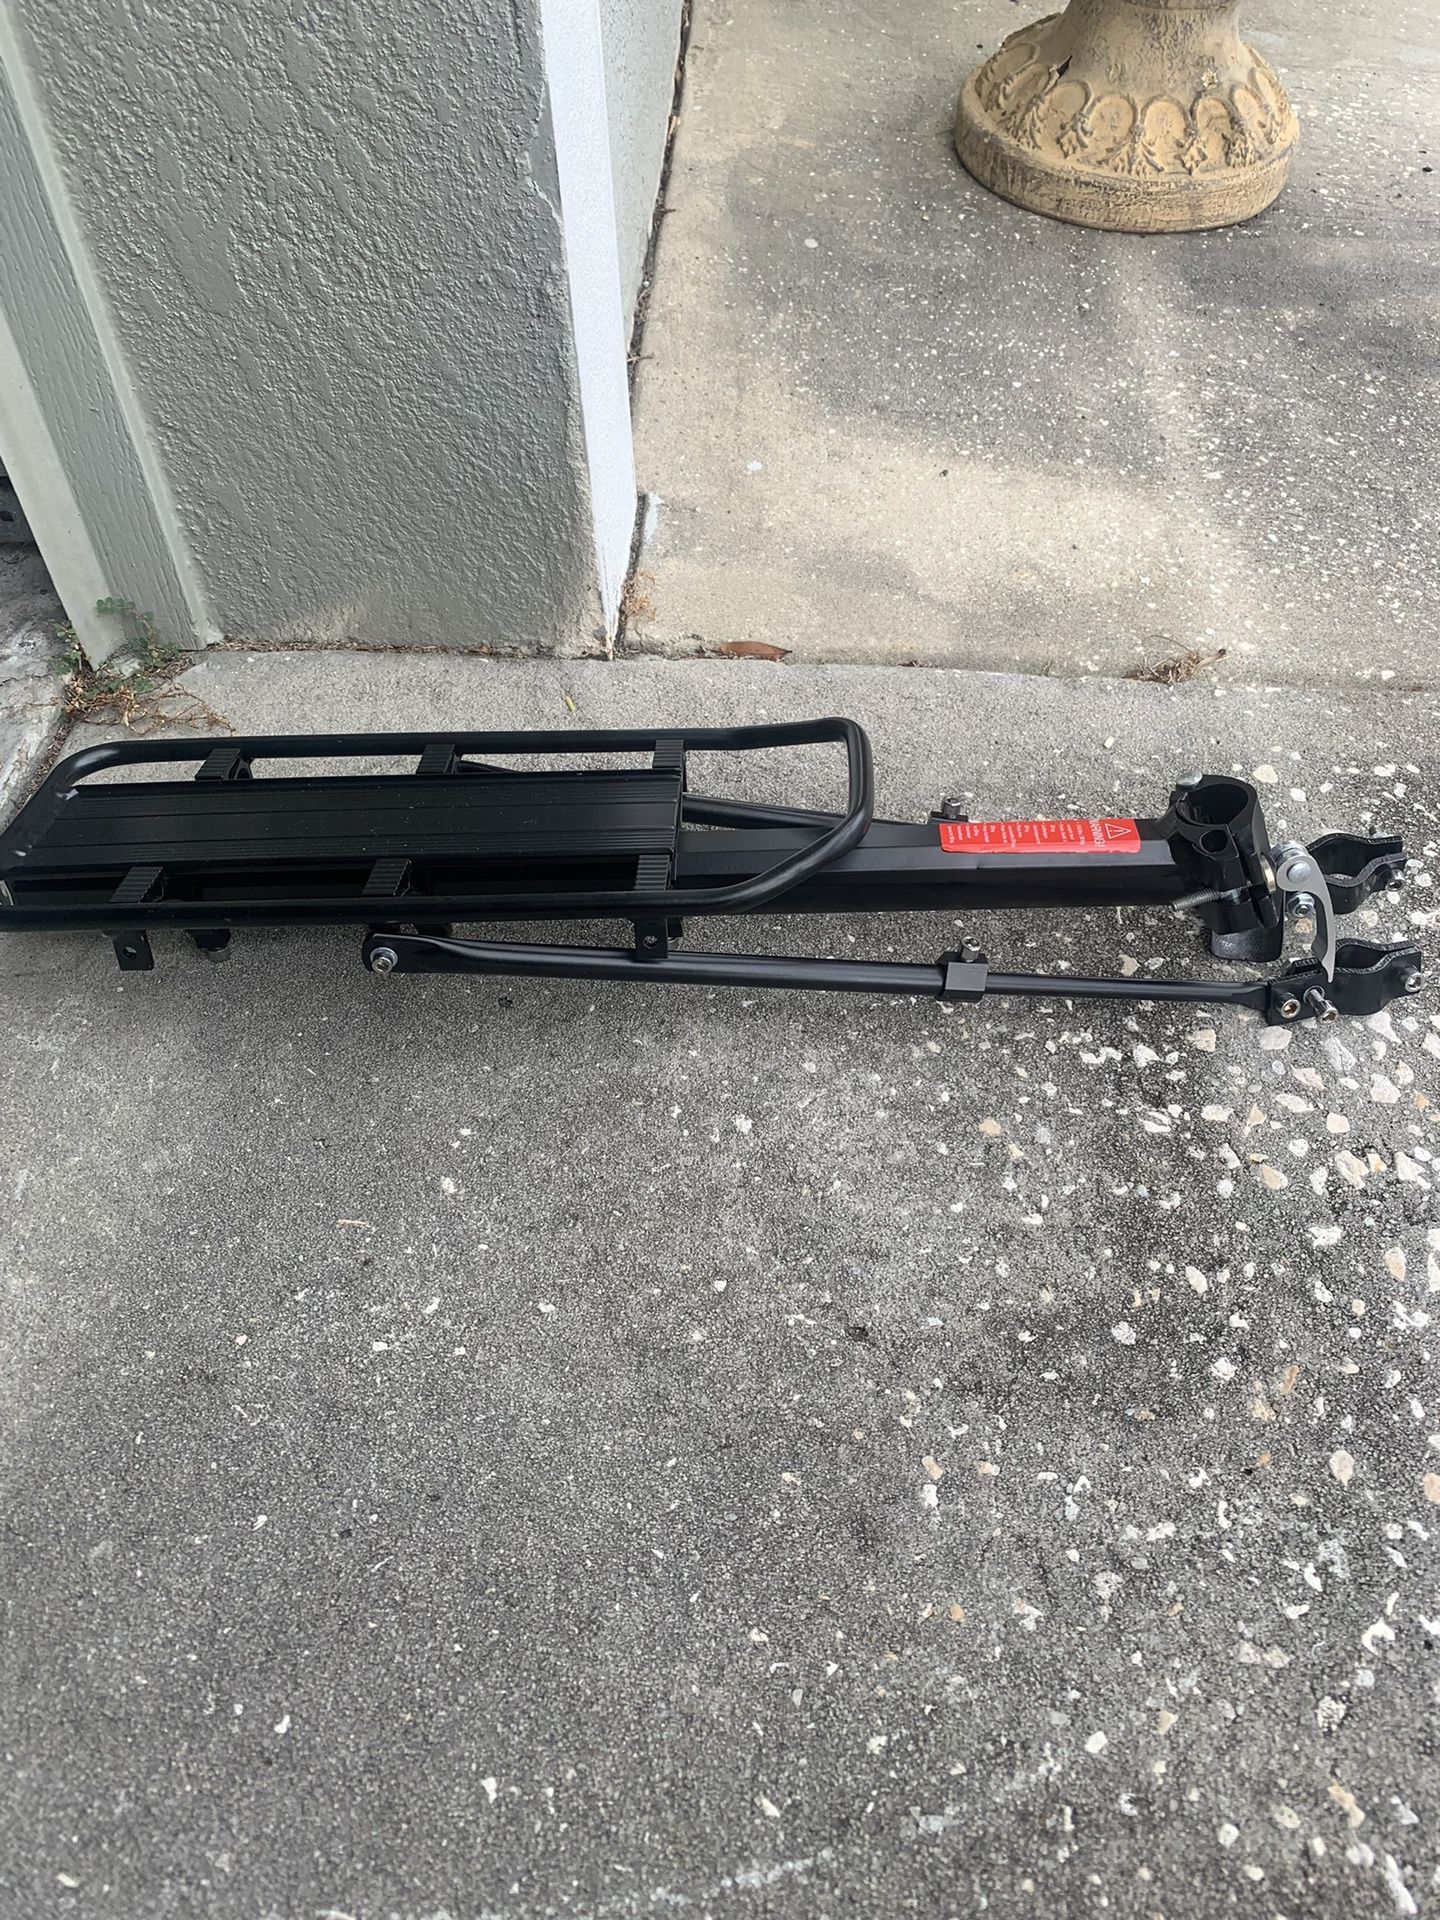 BICYCLE RACK FOR SALE